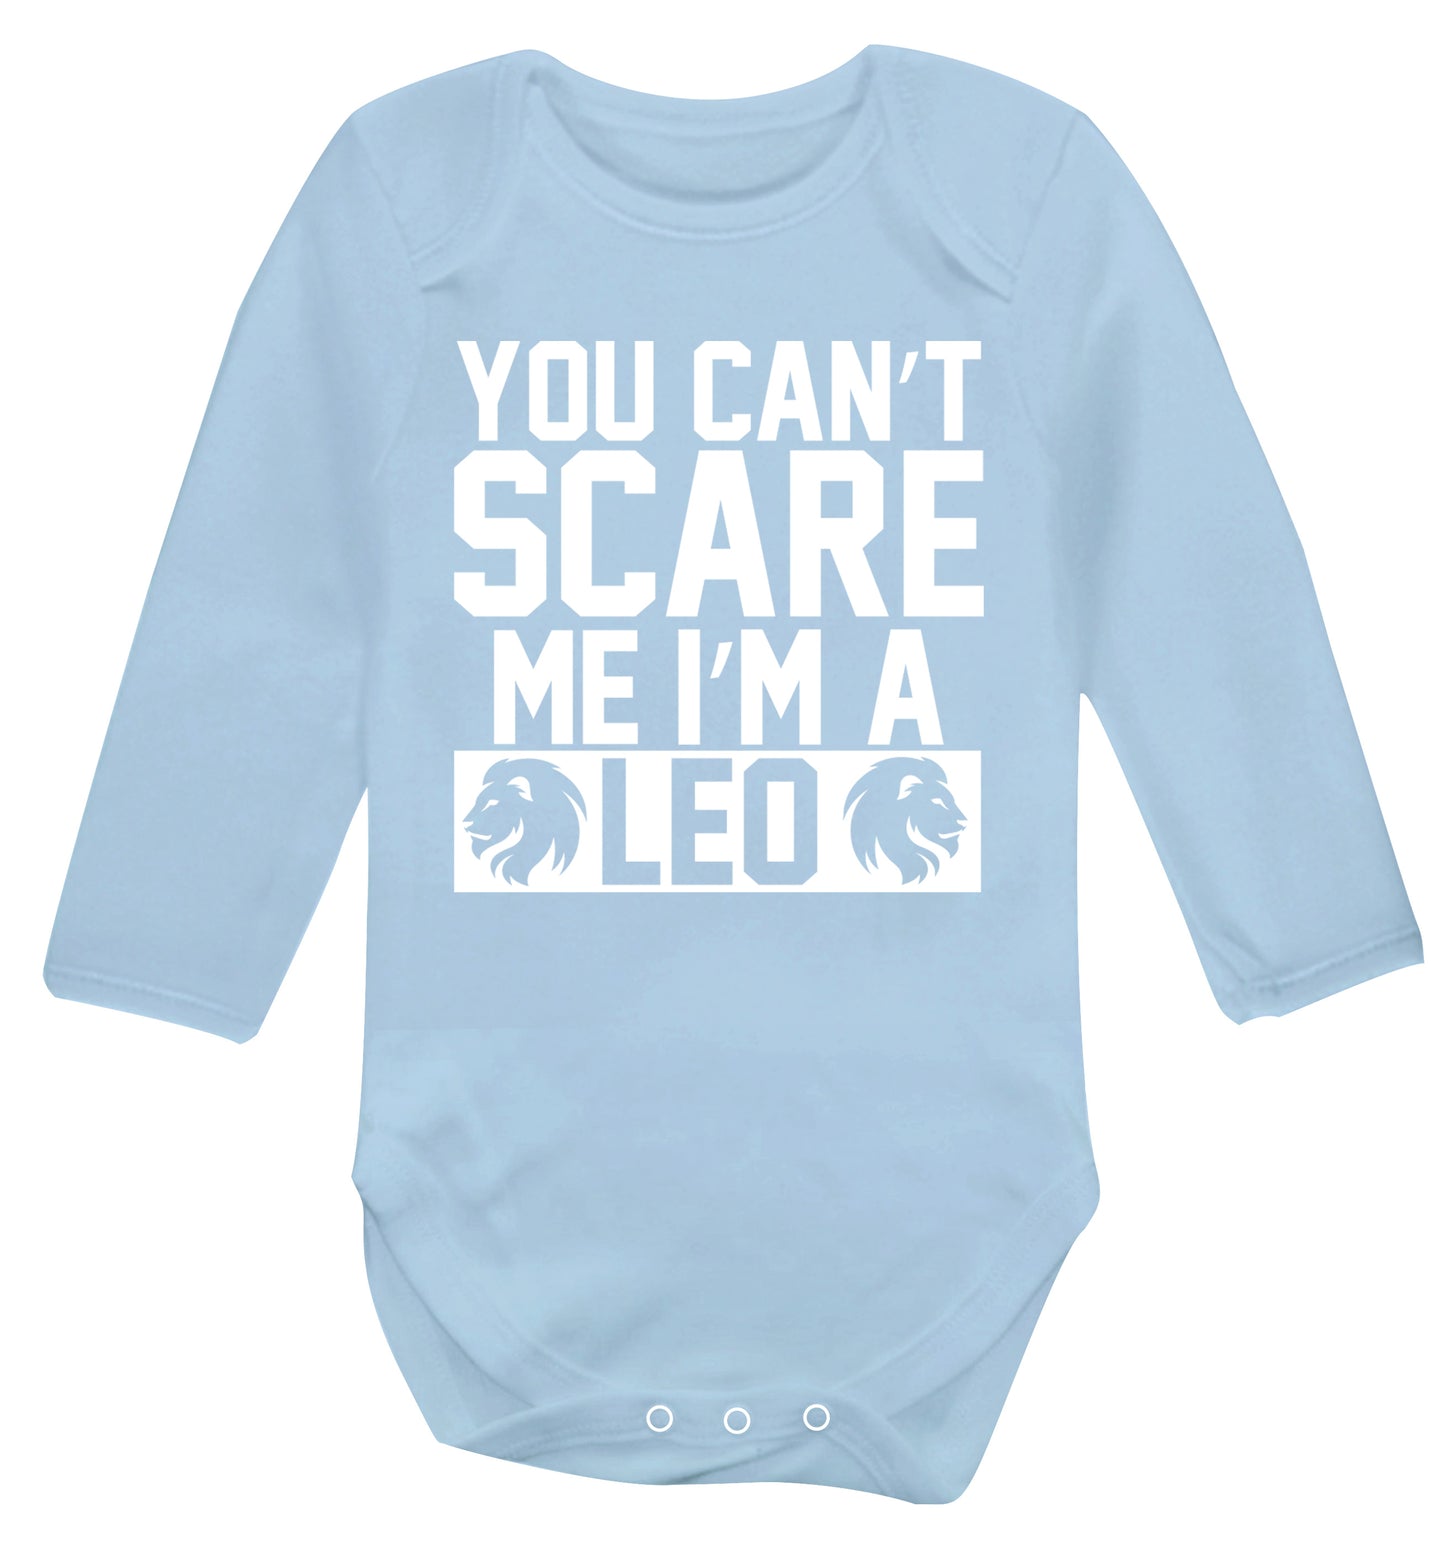 You can't scare me I'm a leo Baby Vest long sleeved pale blue 6-12 months